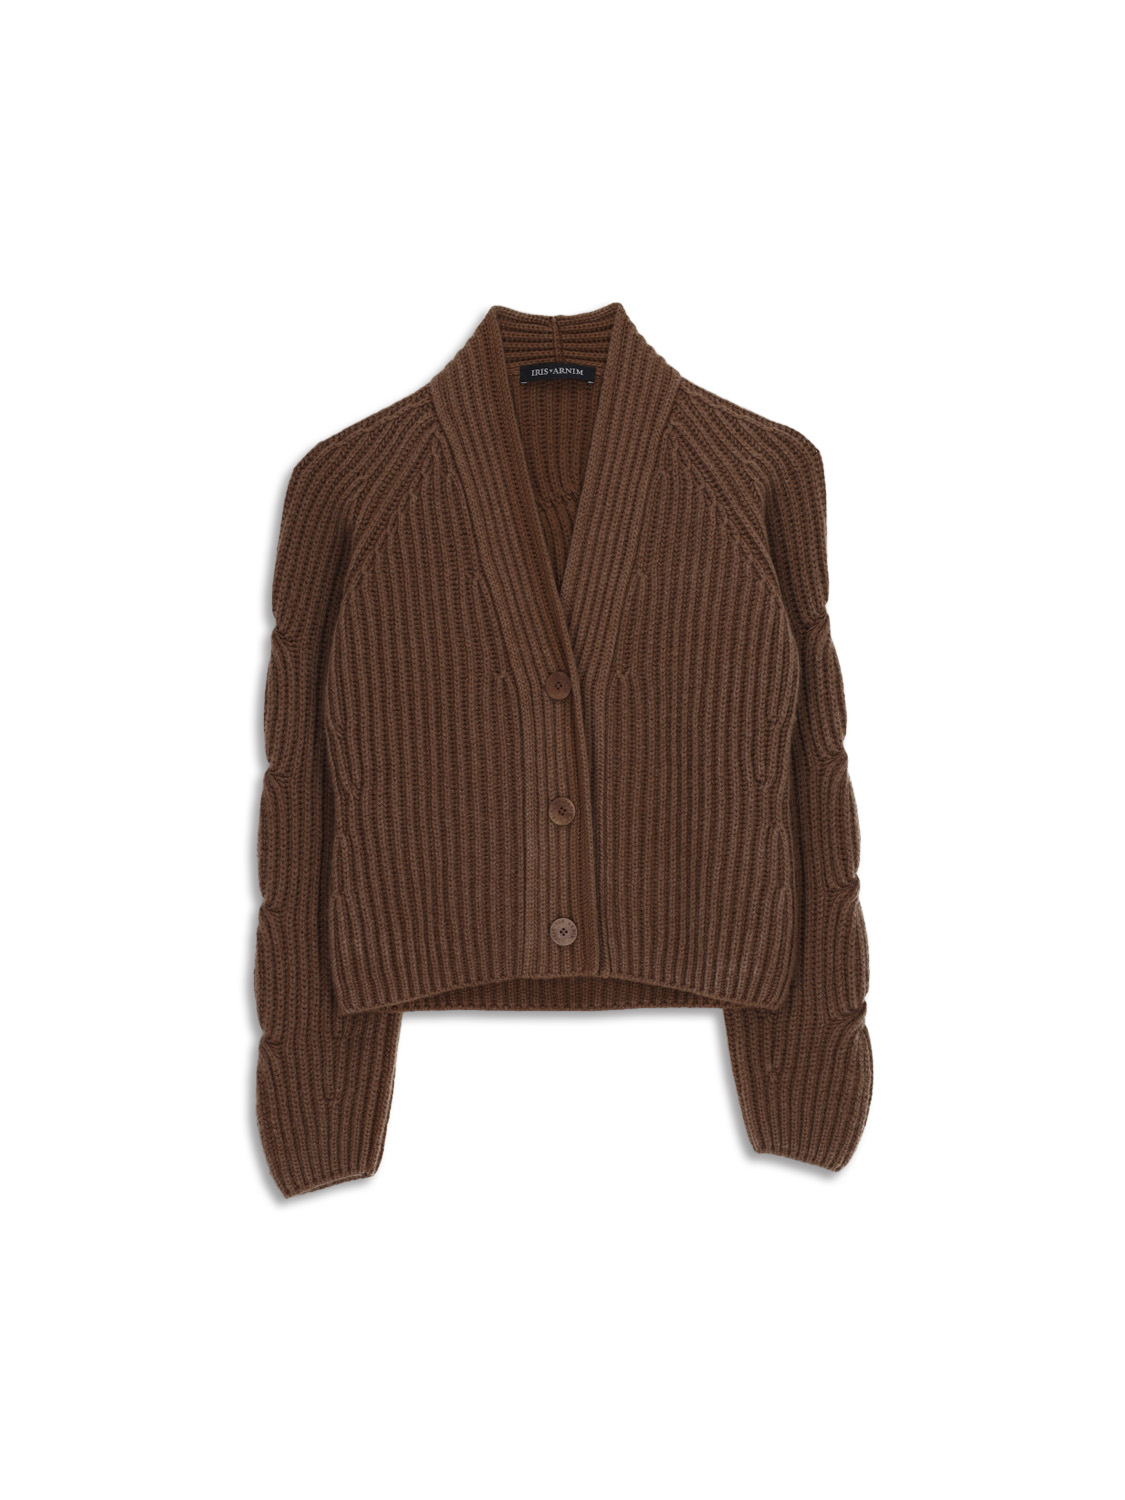 Ursula - Chunky knit cardigan in cashmere